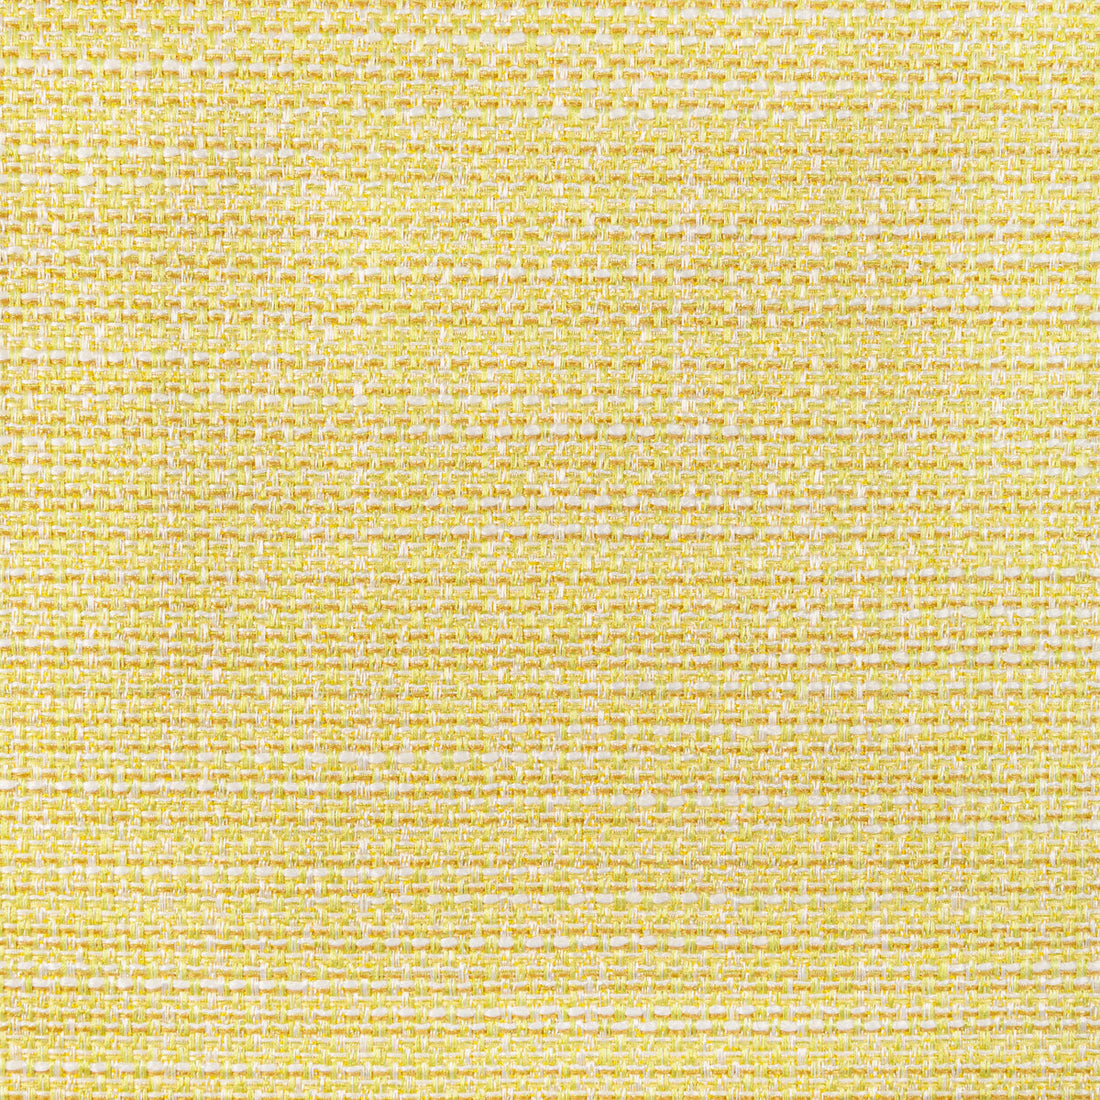 Luma Texture fabric in citron color - pattern 4947.423.0 - by Kravet Contract in the Fr Window Luma Texture collection